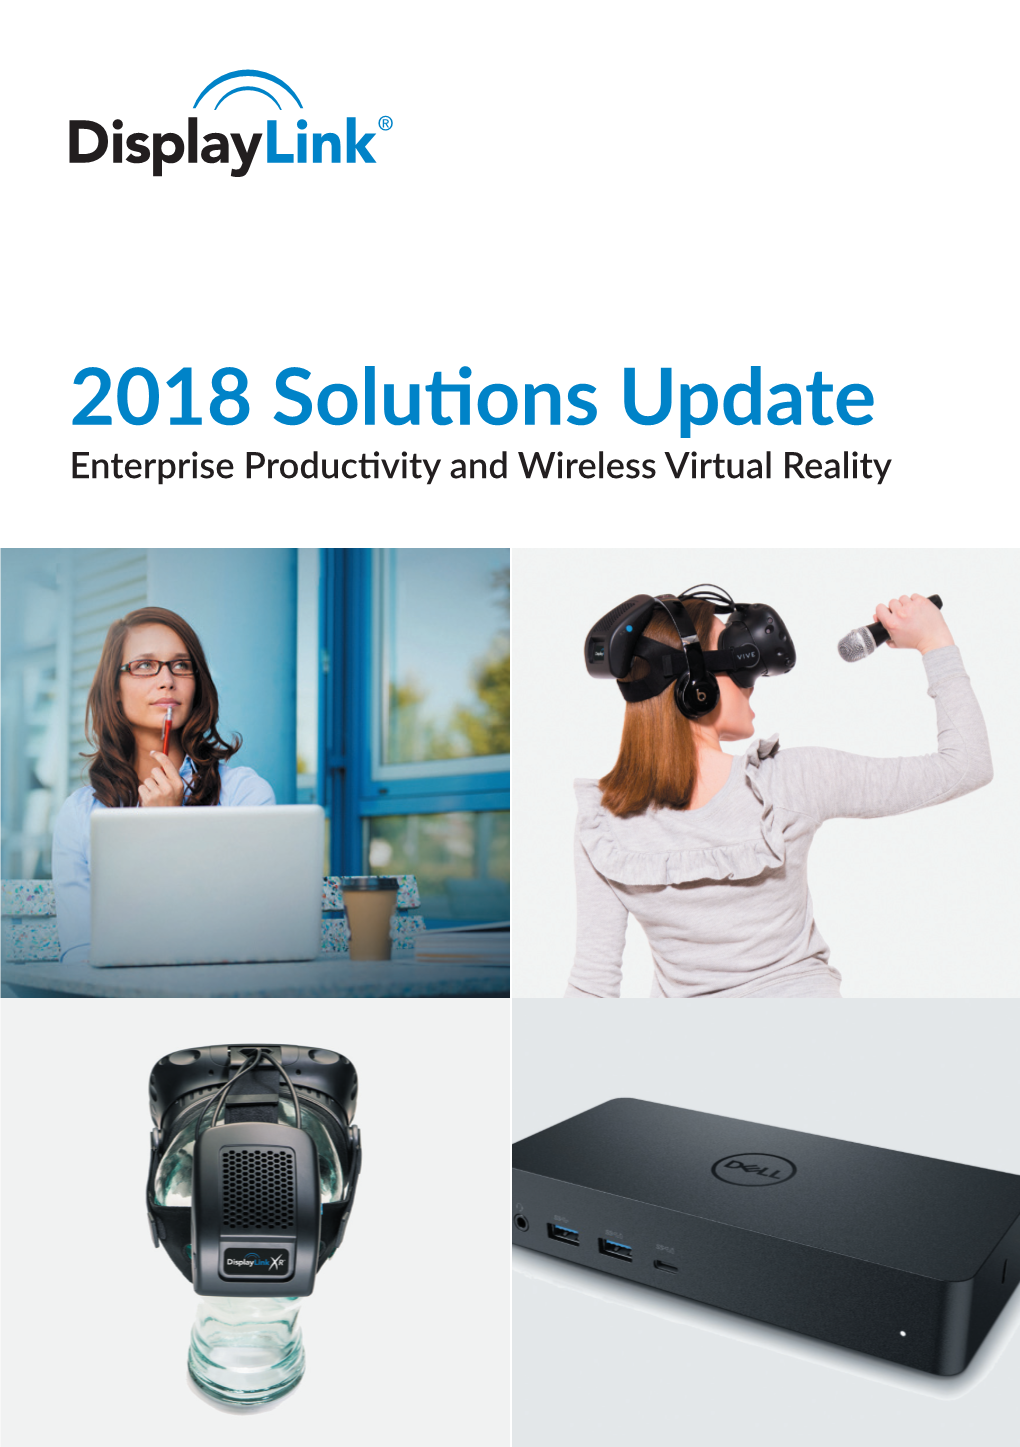 2018 Solutions Update Enterprise Productivity and Wireless Virtual Reality 02 2018 Solutions Update